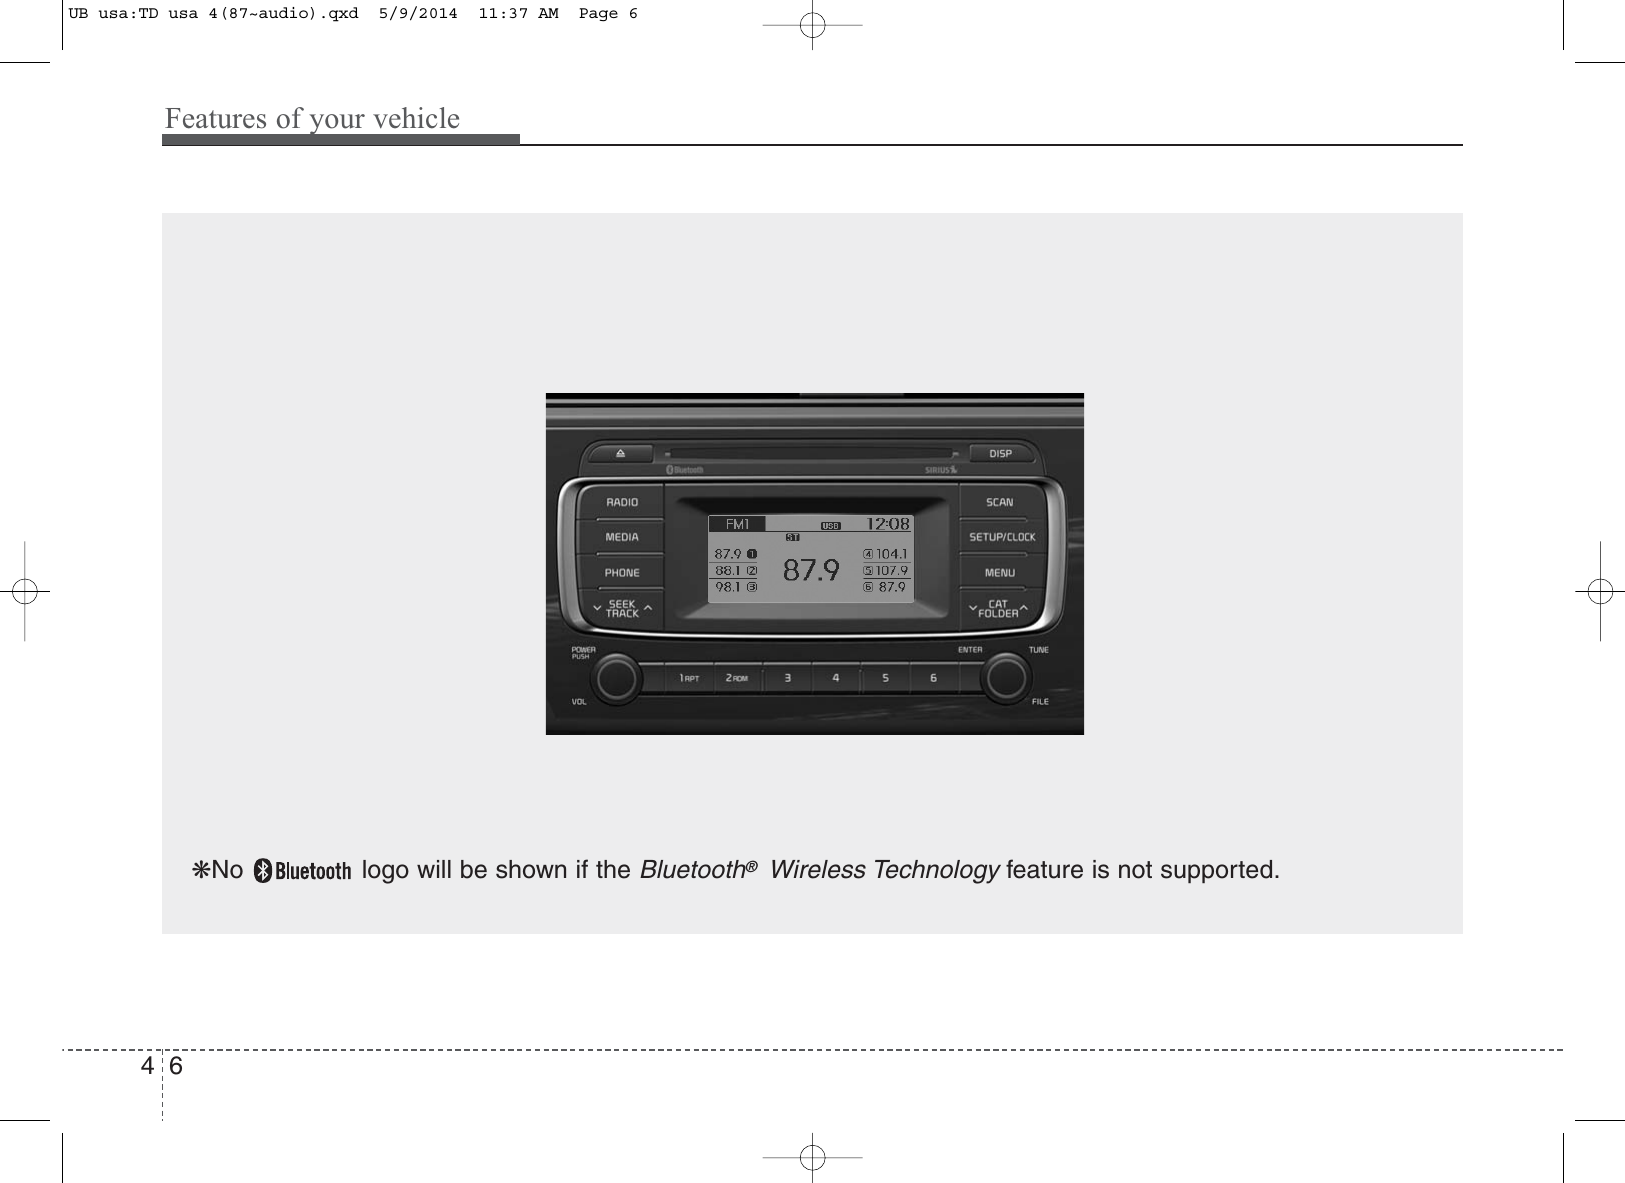 Features of your vehicle64❋No  logo will be shown if the Bluetooth®Wireless Technologyfeature is not supported.UB usa:TD usa 4(87~audio).qxd  5/9/2014  11:37 AM  Page 6